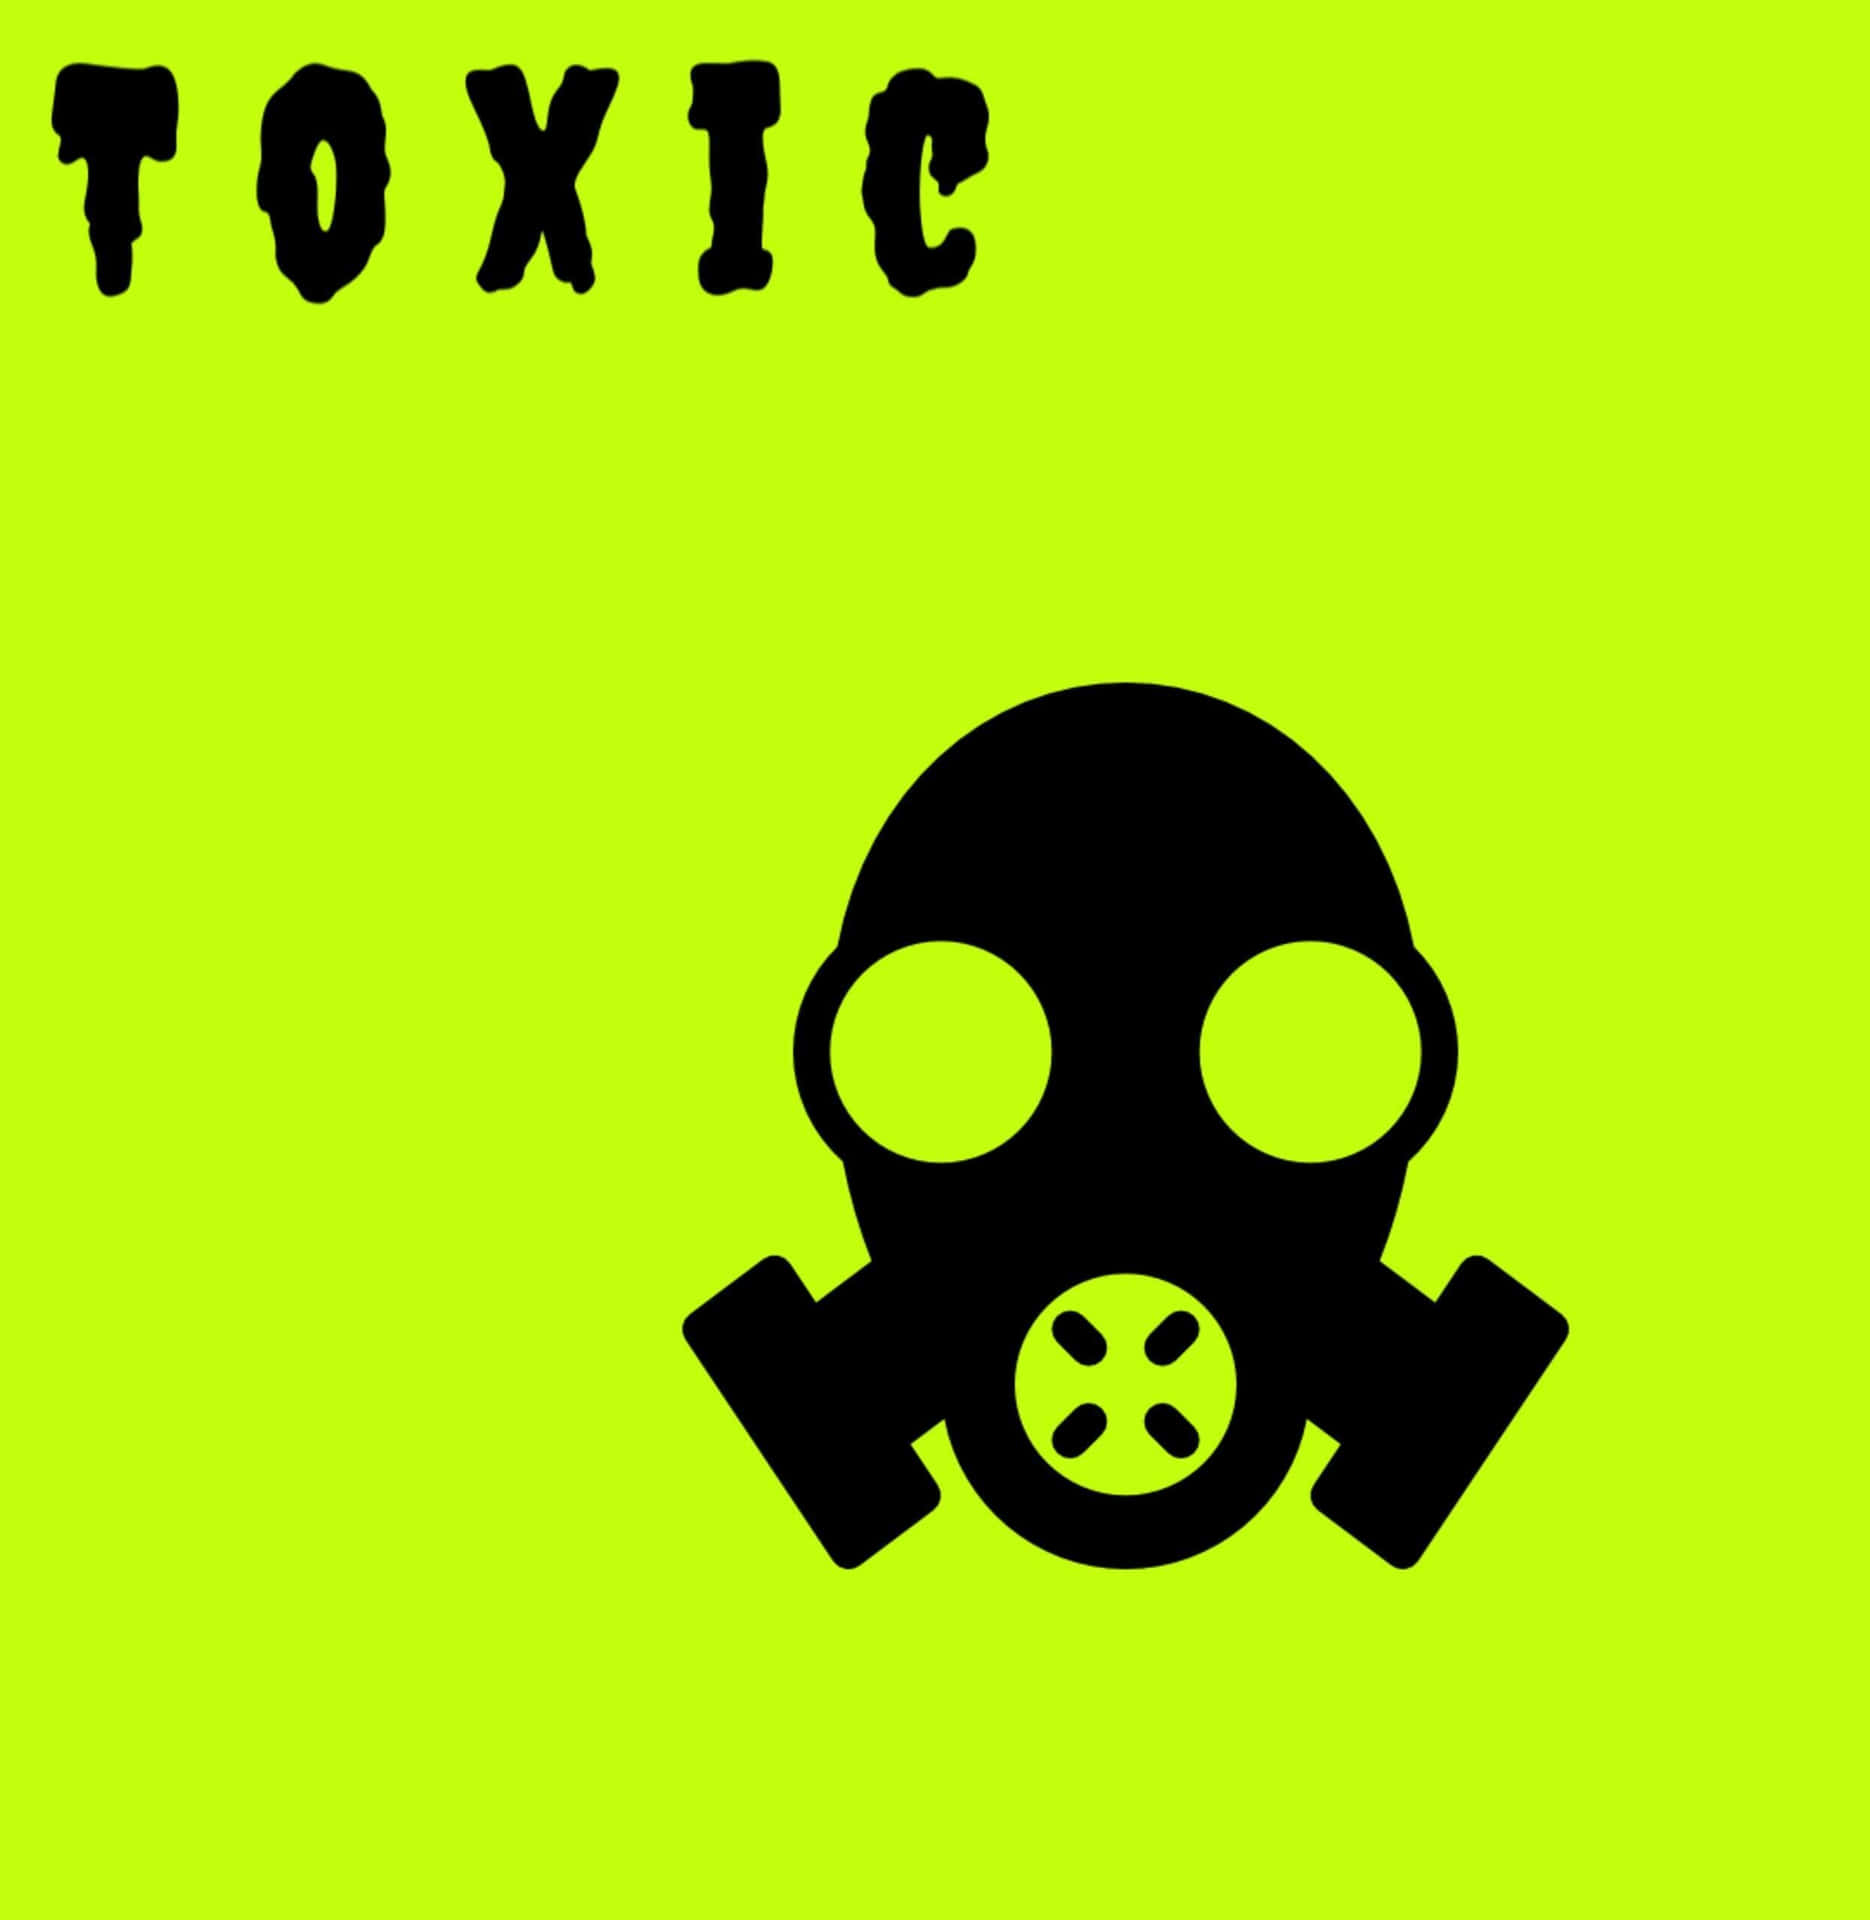 A Gas Mask With The Word Toxic On It Background